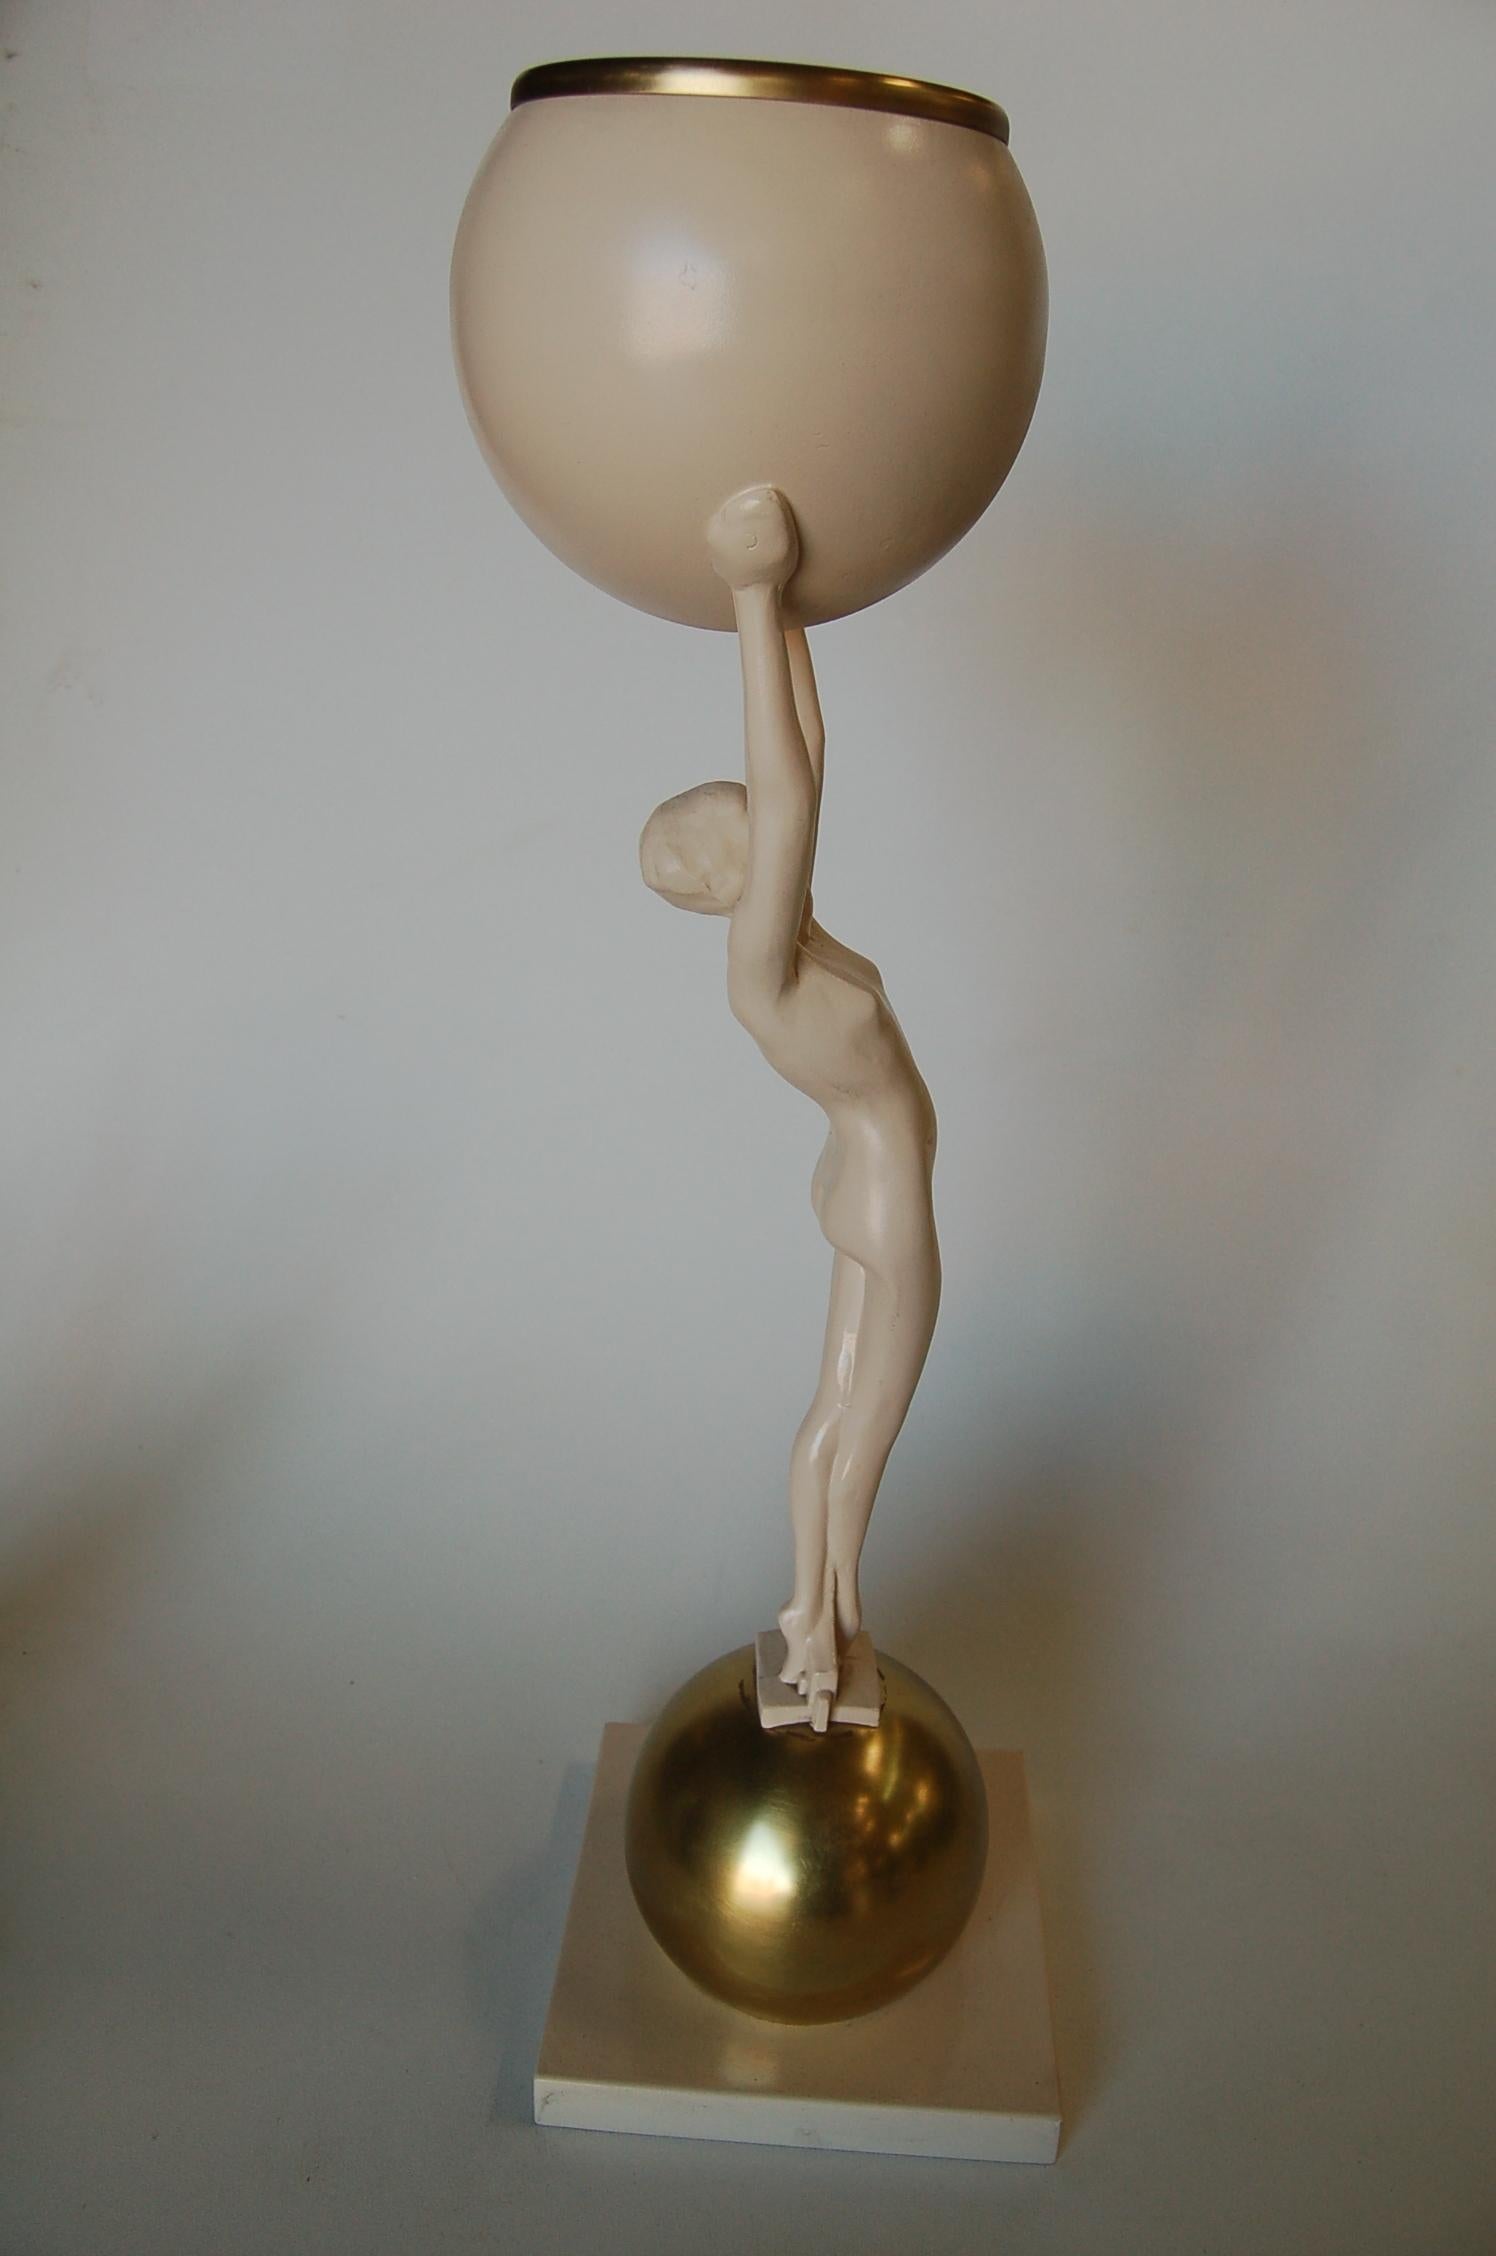 Striking Frankart-style table lamp featuring a nude female figure on top of a gold ball holding a white ball that contains a light. 

Measures 8